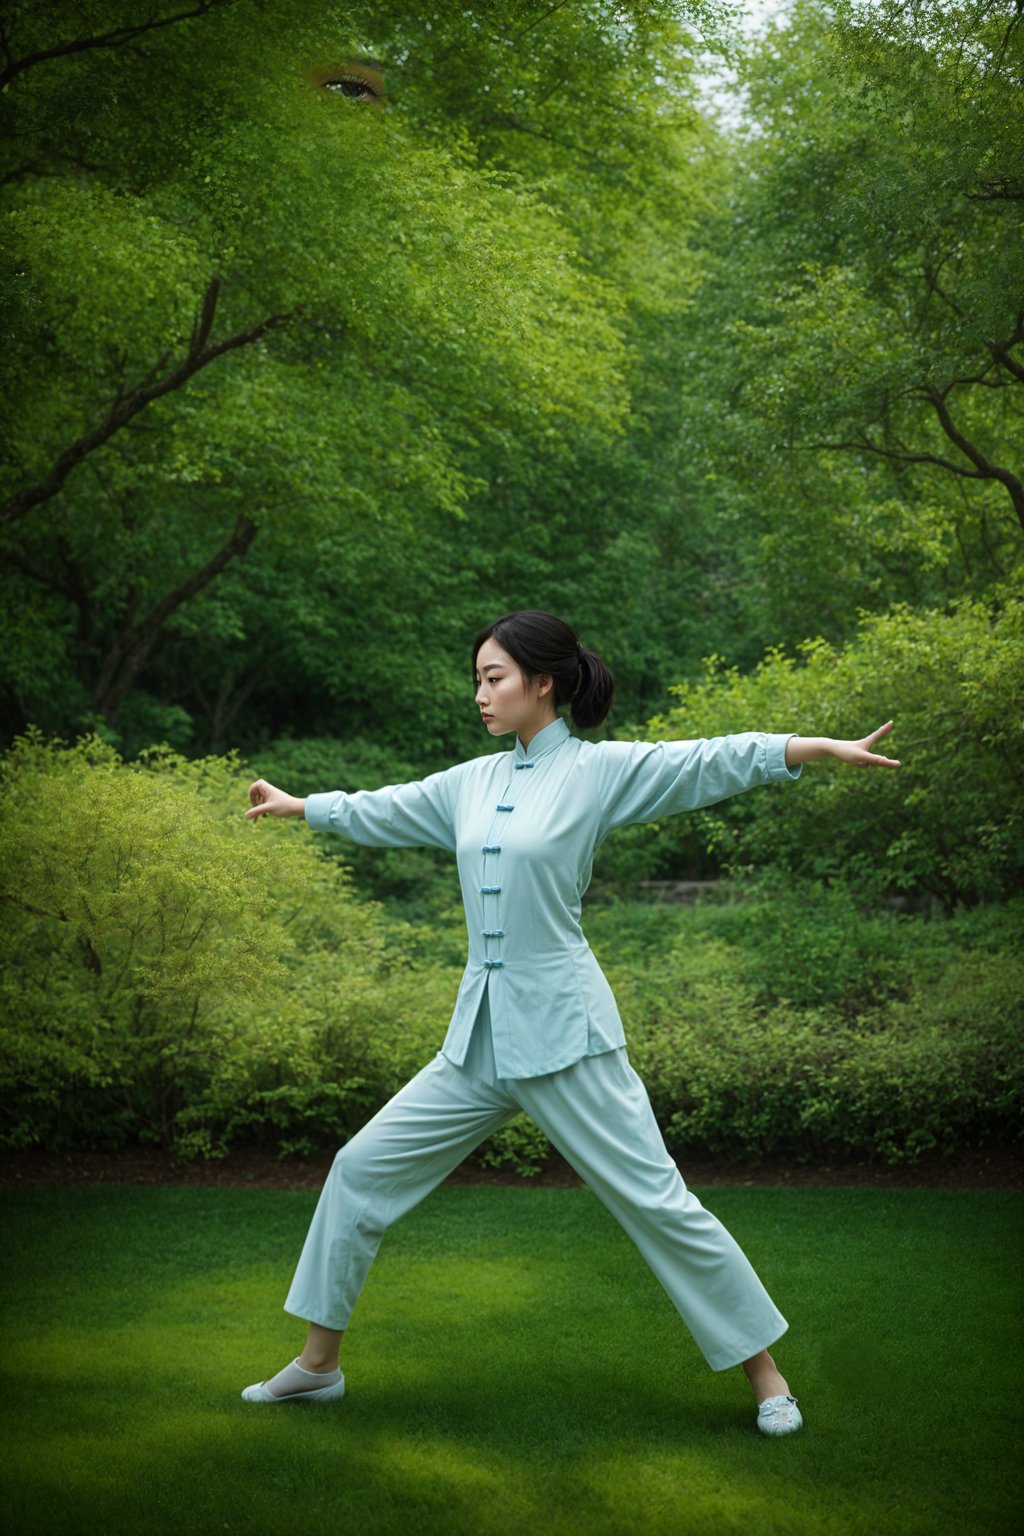 woman practicing Tai Chi or Qigong in a serene garden or open space, capturing the flowing movements and the cultivation of energy and vitality